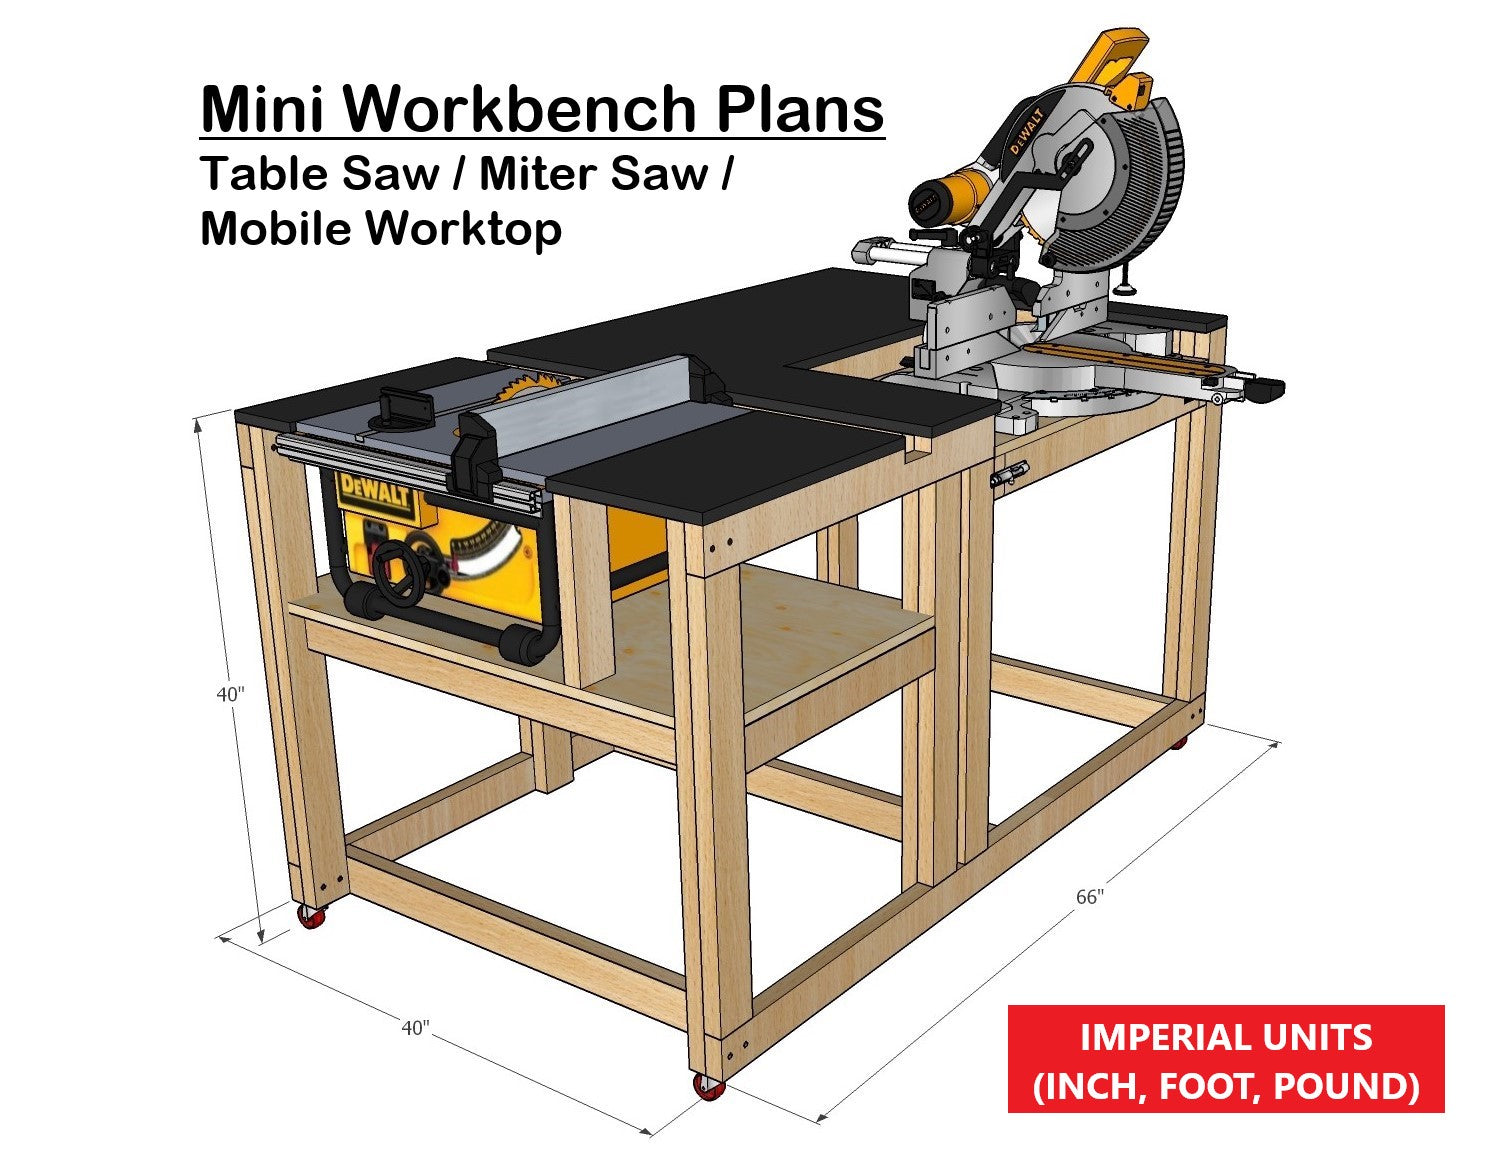 Compact Mobile Workbench Plans For